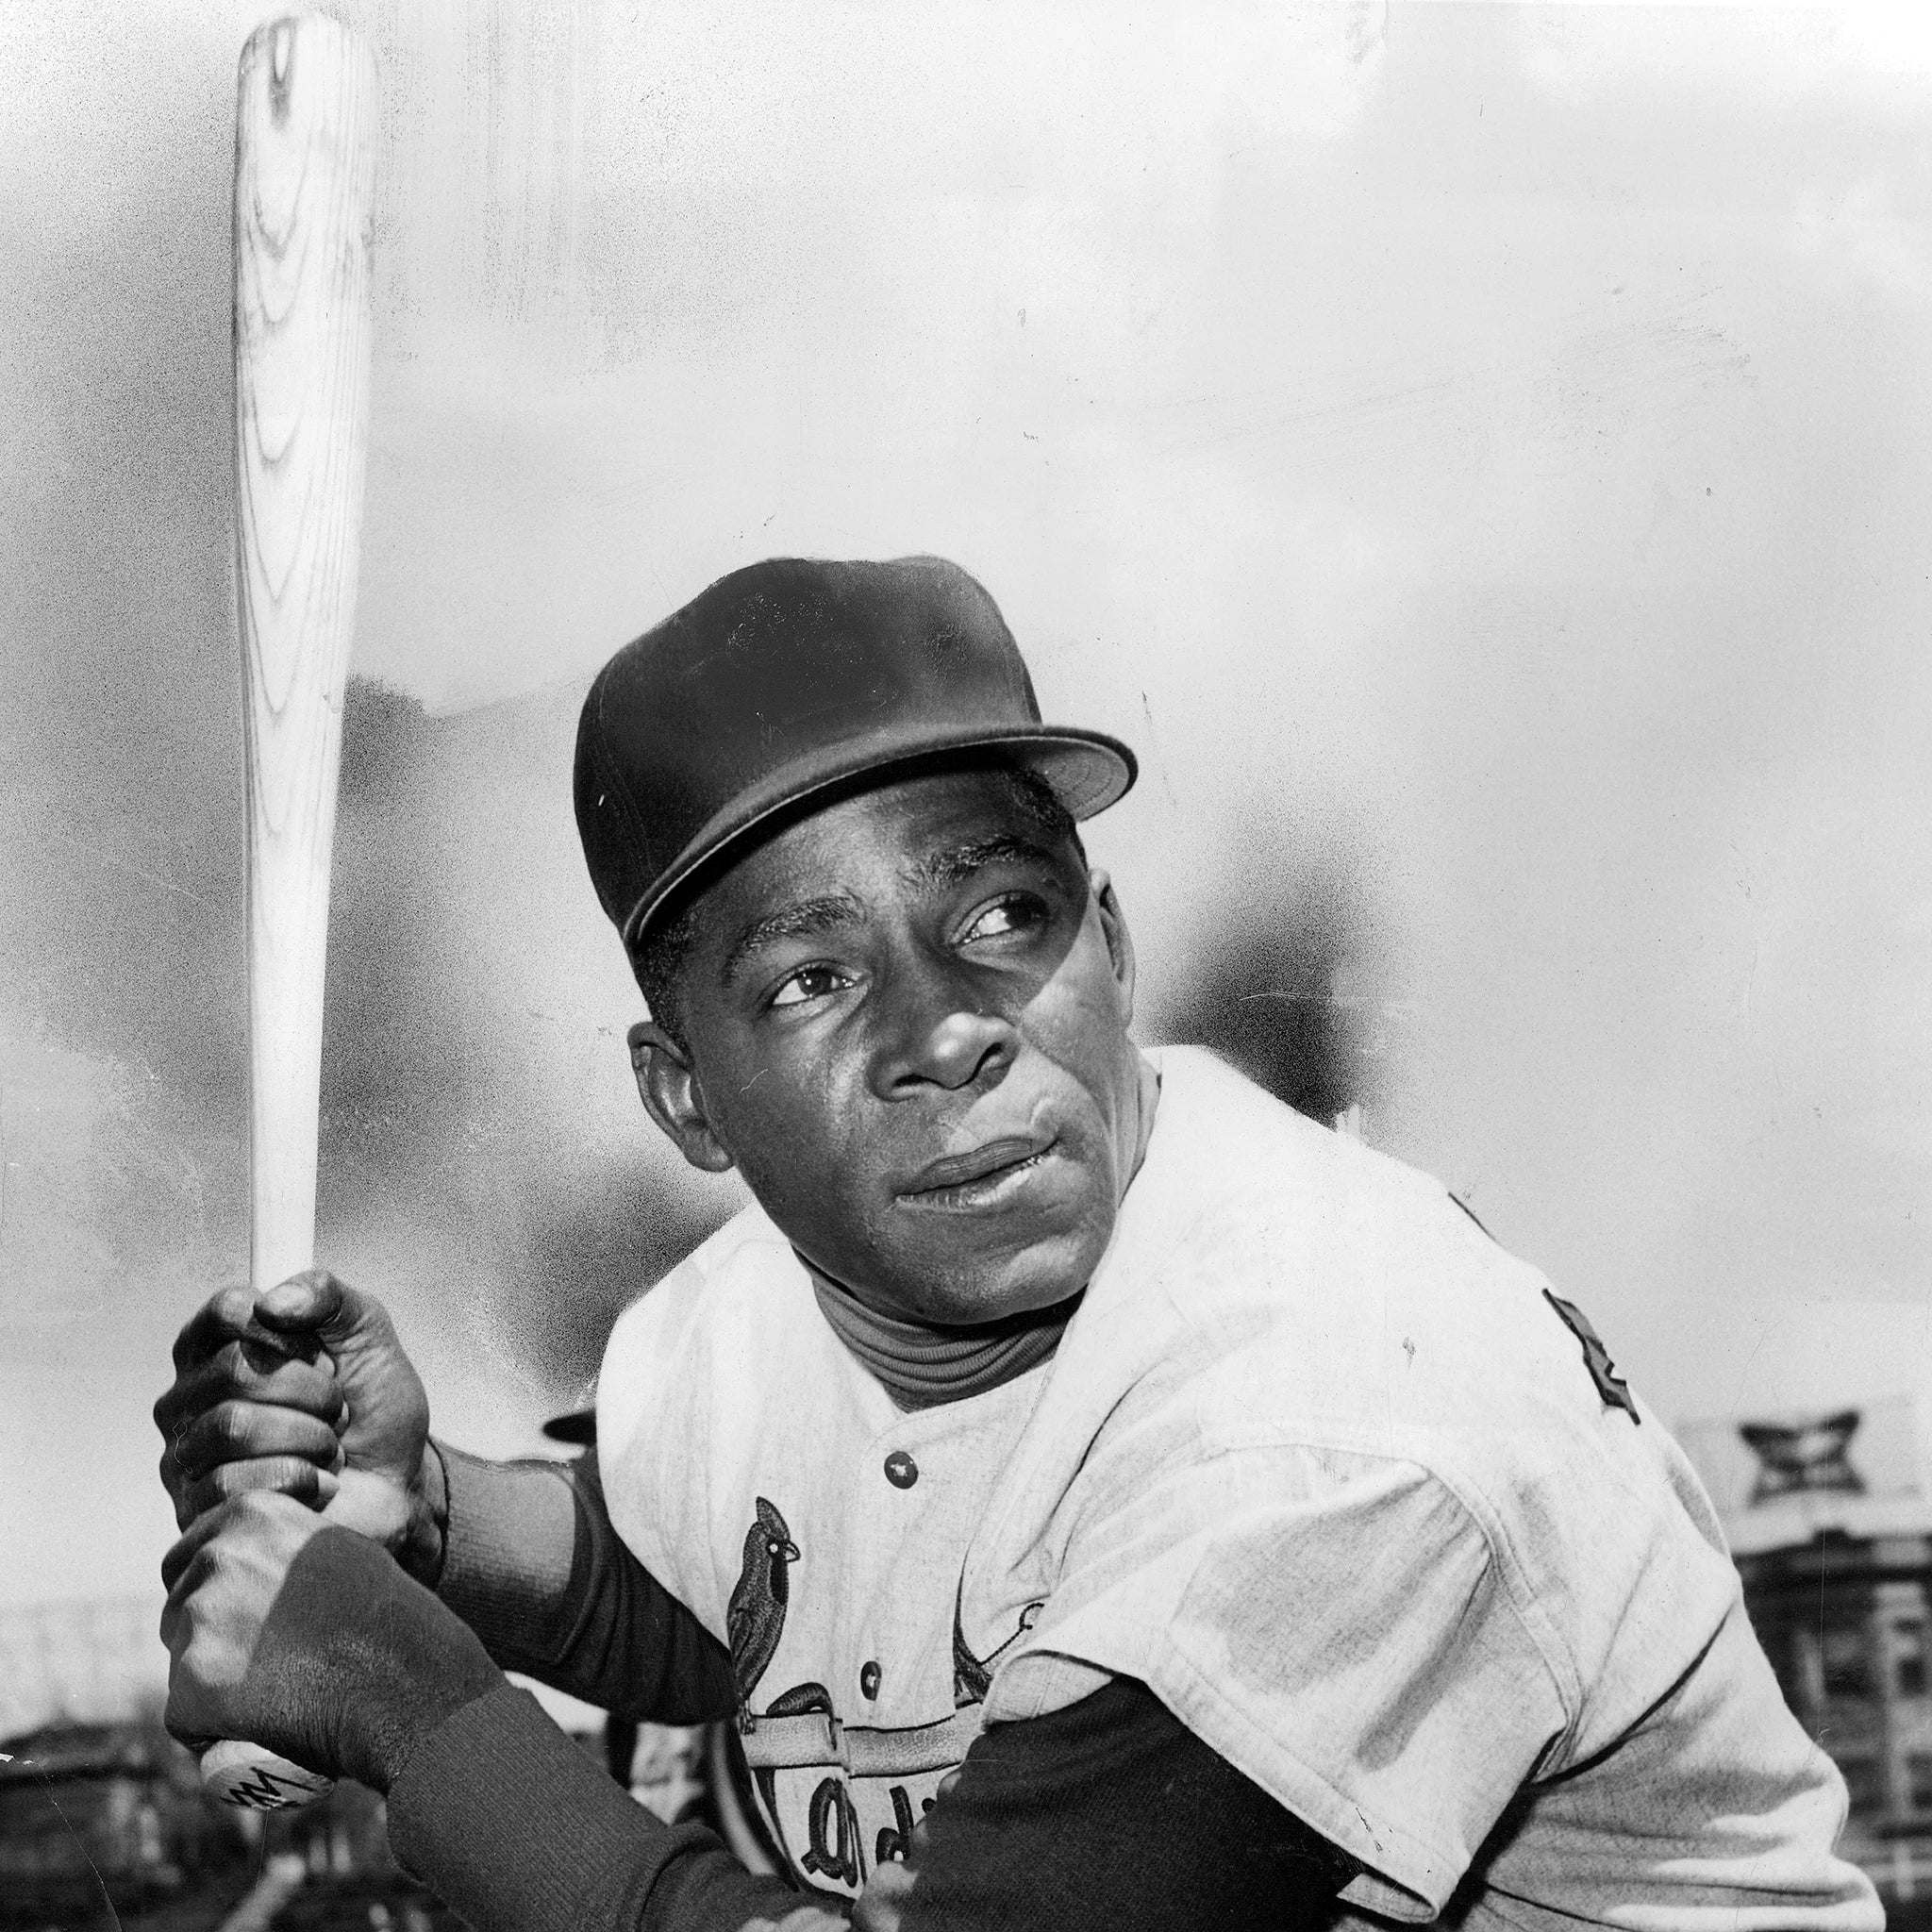 Minnie Minoso of the St. Louis Cardinals at Wrigley Field during a Cardinals game against the Chicago Cubs in April 1962